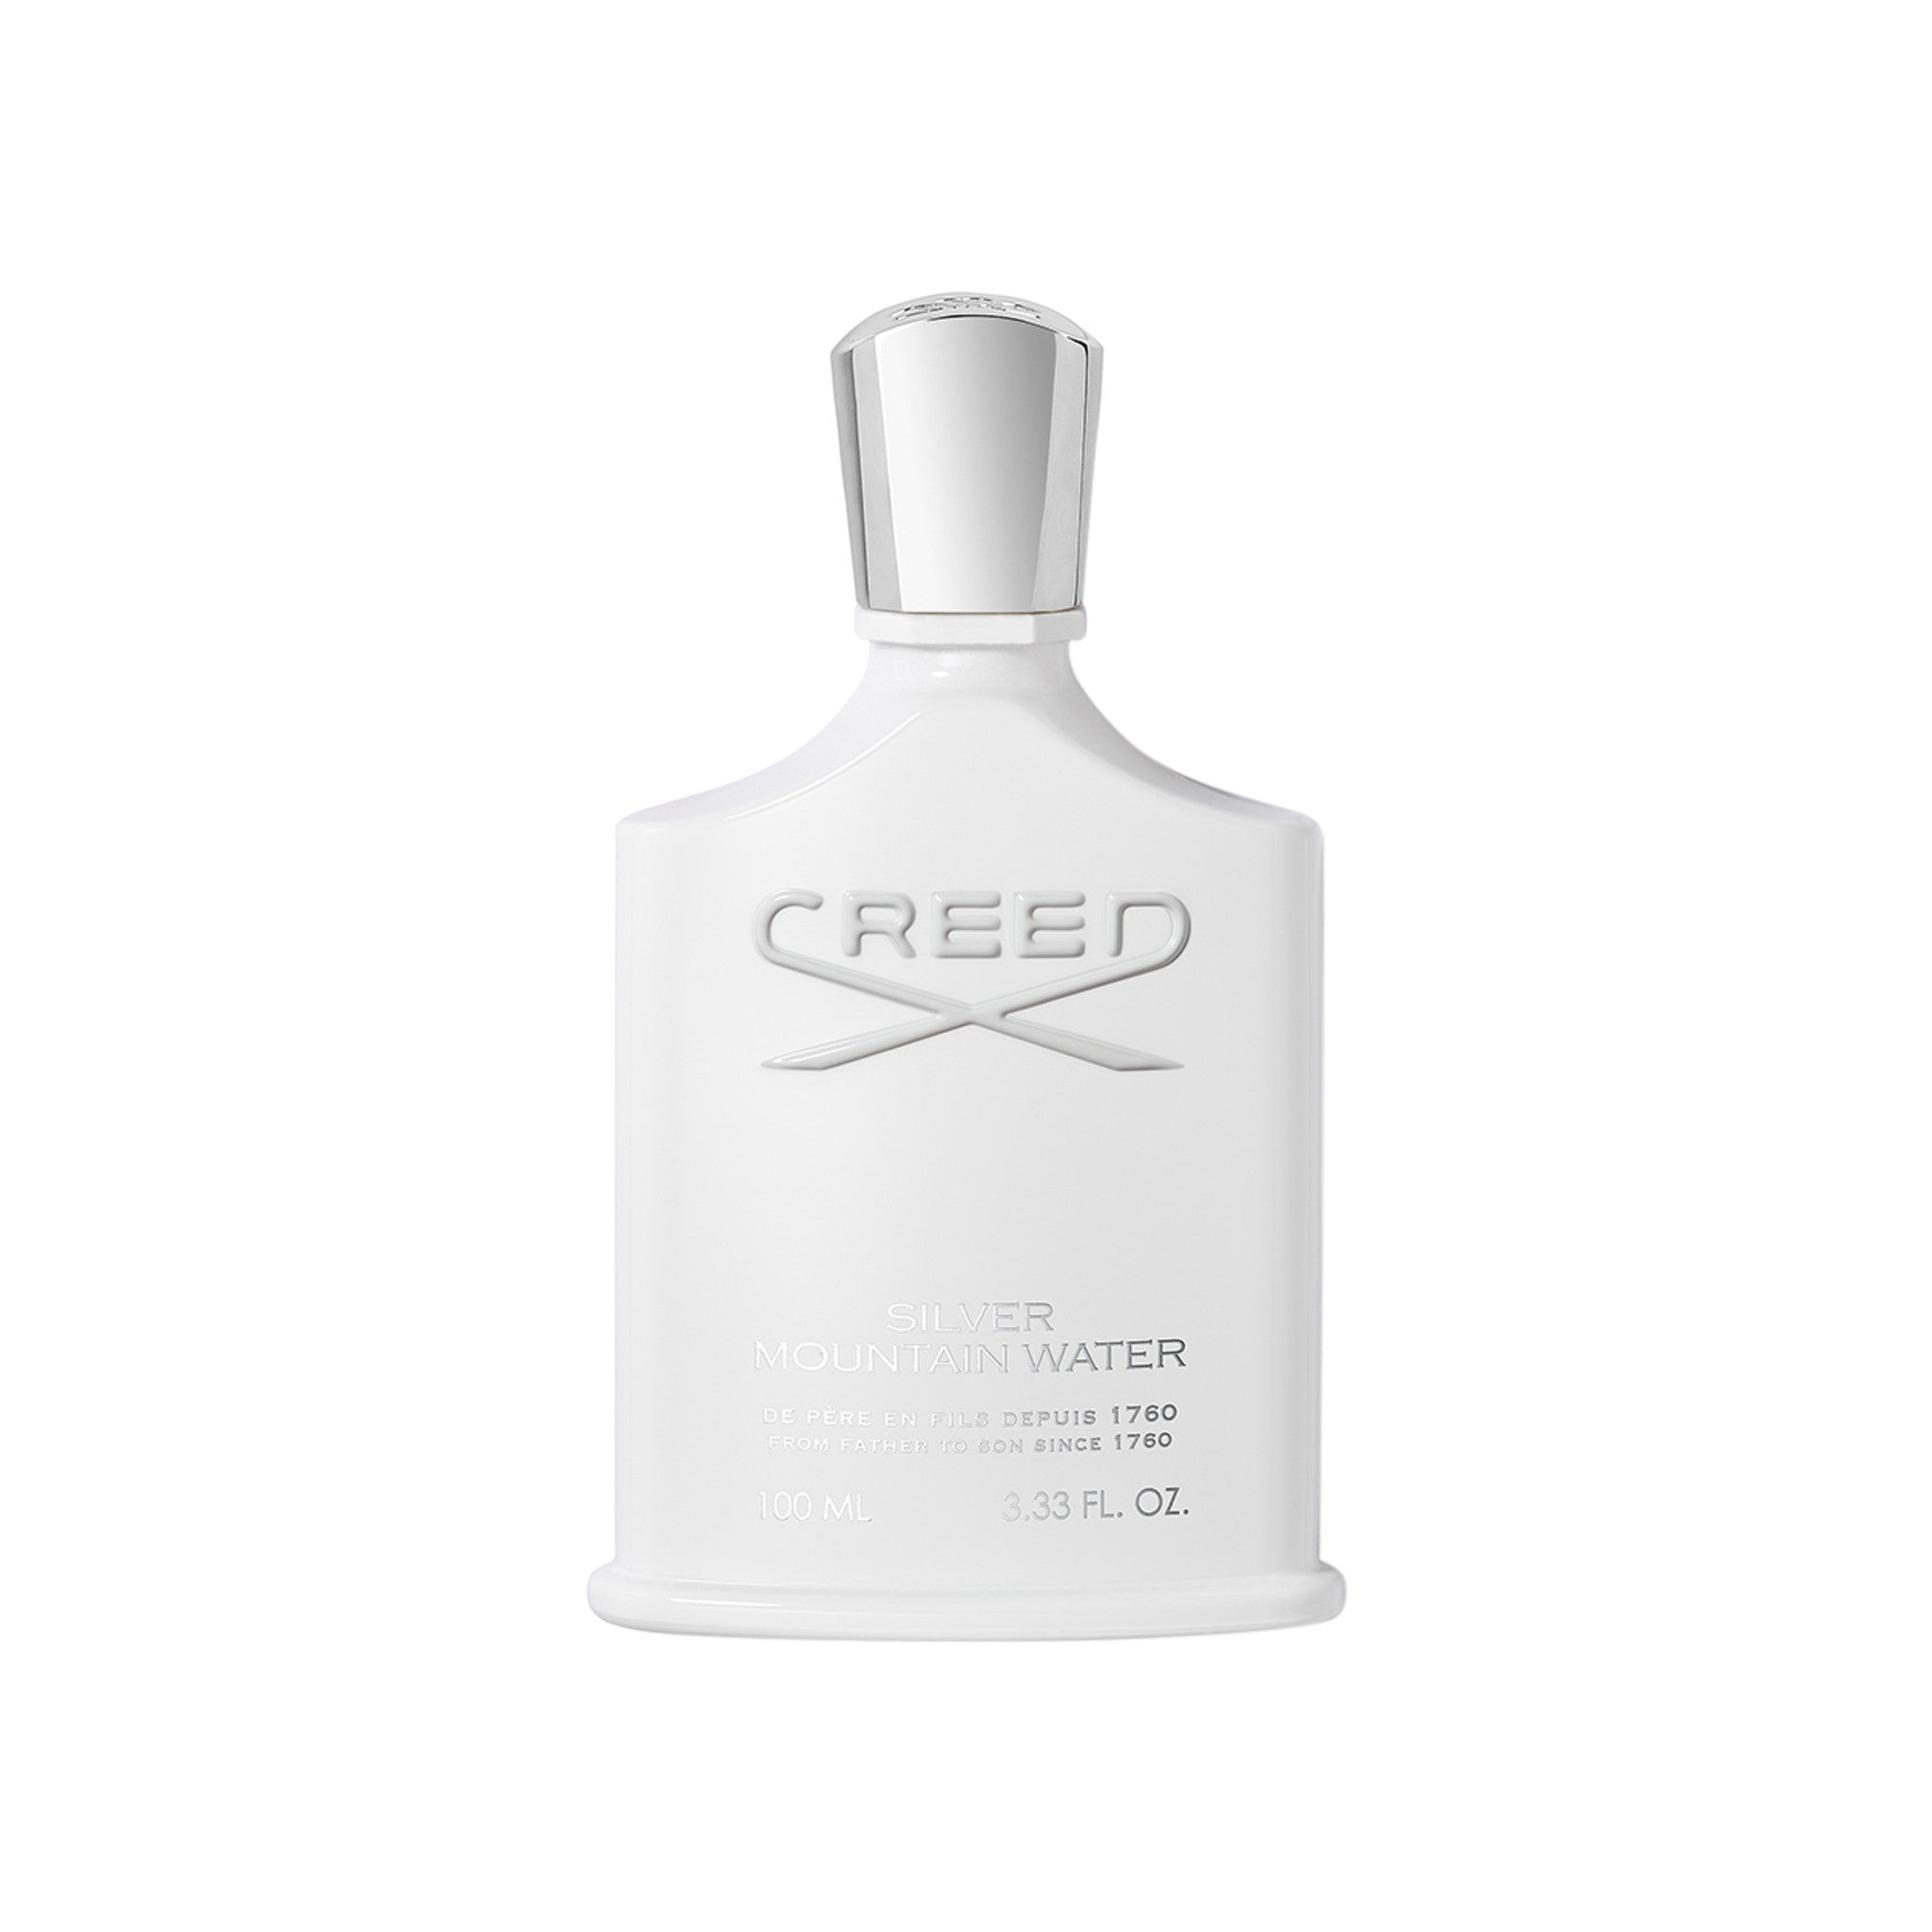 Creed Silver Mountain Water Size variant: 3.38 fl oz main image.